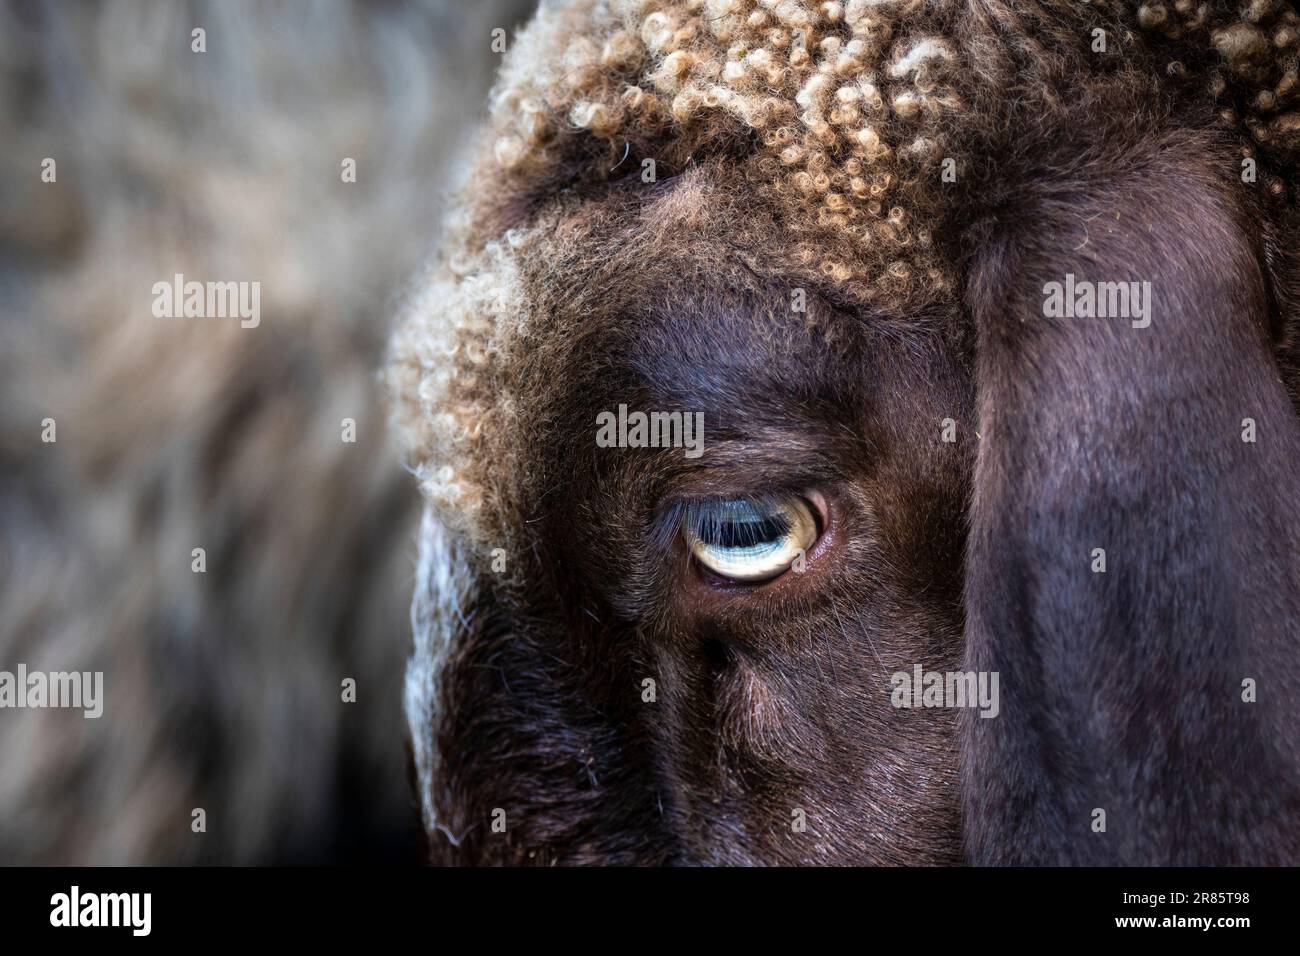 Close portrait of a brown and white sheep. Stock Photo